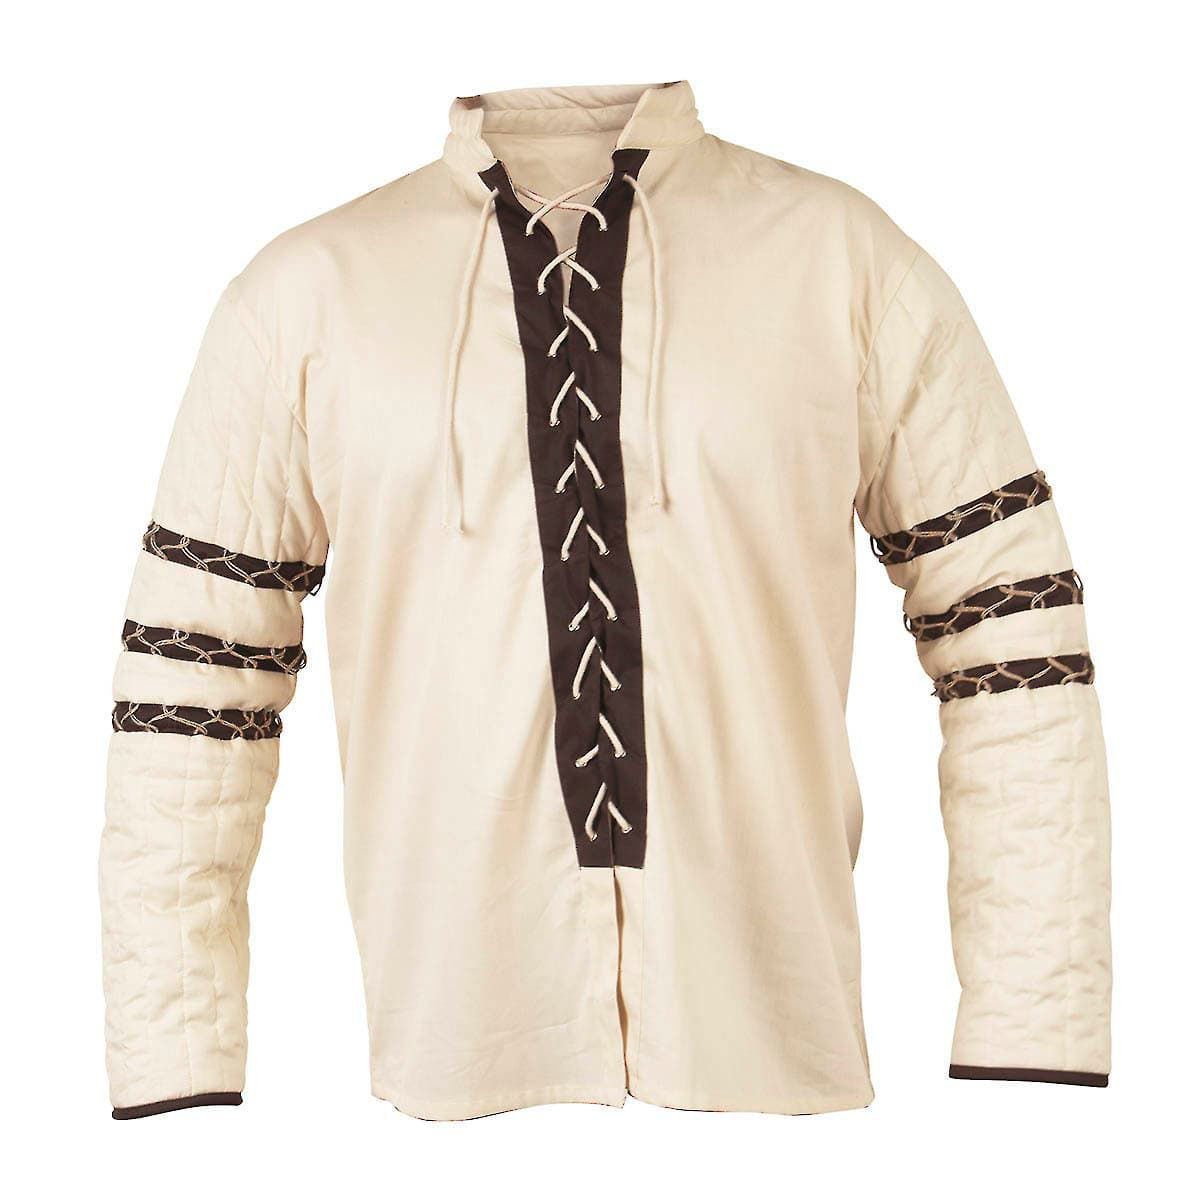 Lace-up cotton shirt has lightly padded sleeves with Nordic string design. Can be worn alone or under a sleeveless doublet